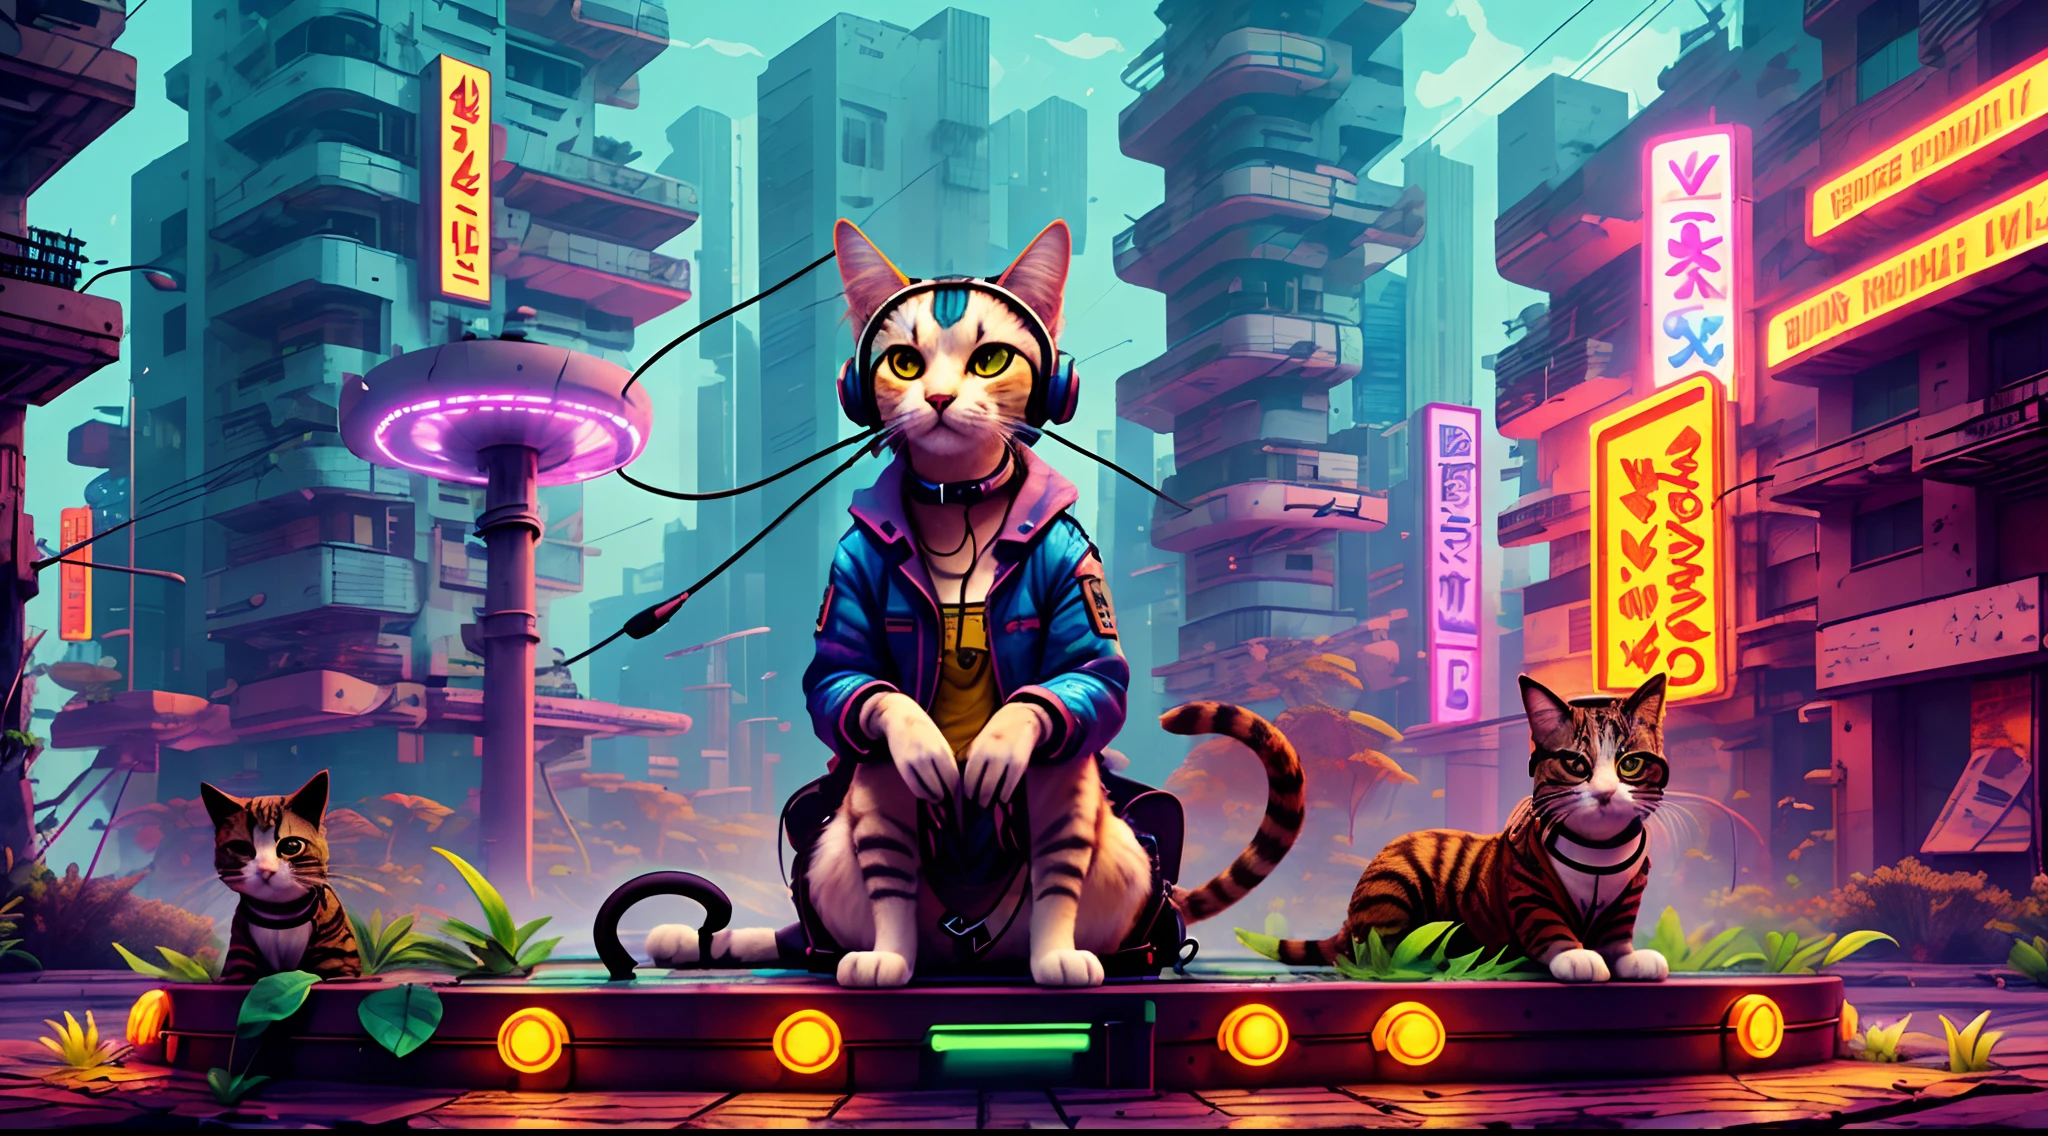 A cat with headphones and a jacket is sitting on a large lily leaf in a fountain. Cyberpunk and post-Soviet modernism  style themed. closeup view, neon lights., Pop art, Pixar, three sided view, UHD, anatomically correct, textured skin, super detail, high quality, 4K